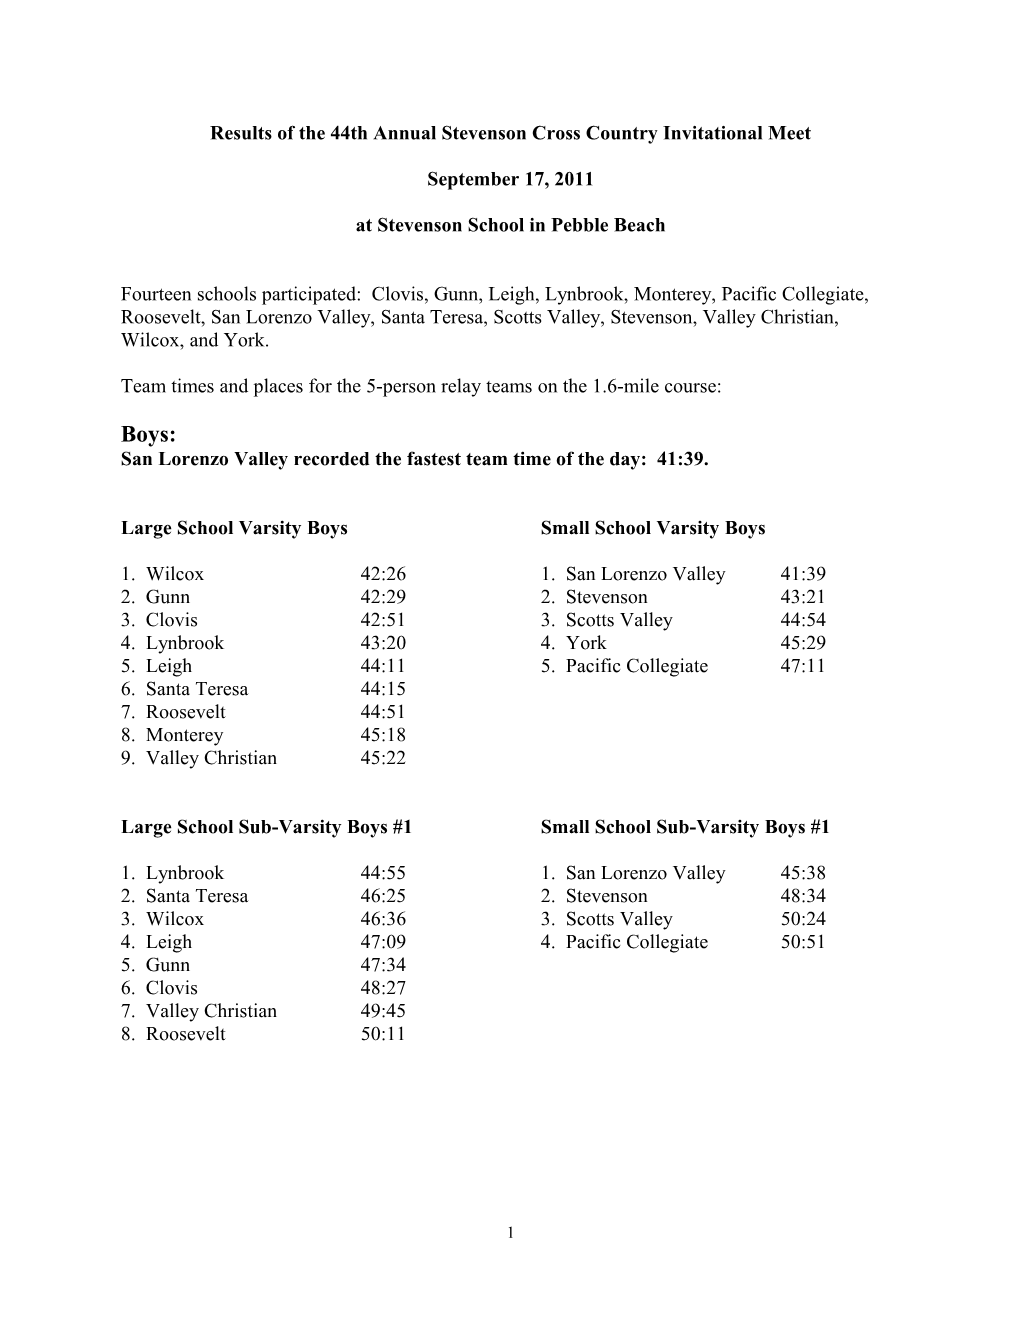 Results of the 33Rd Annual Stevenson Cross Country Invitational Meet